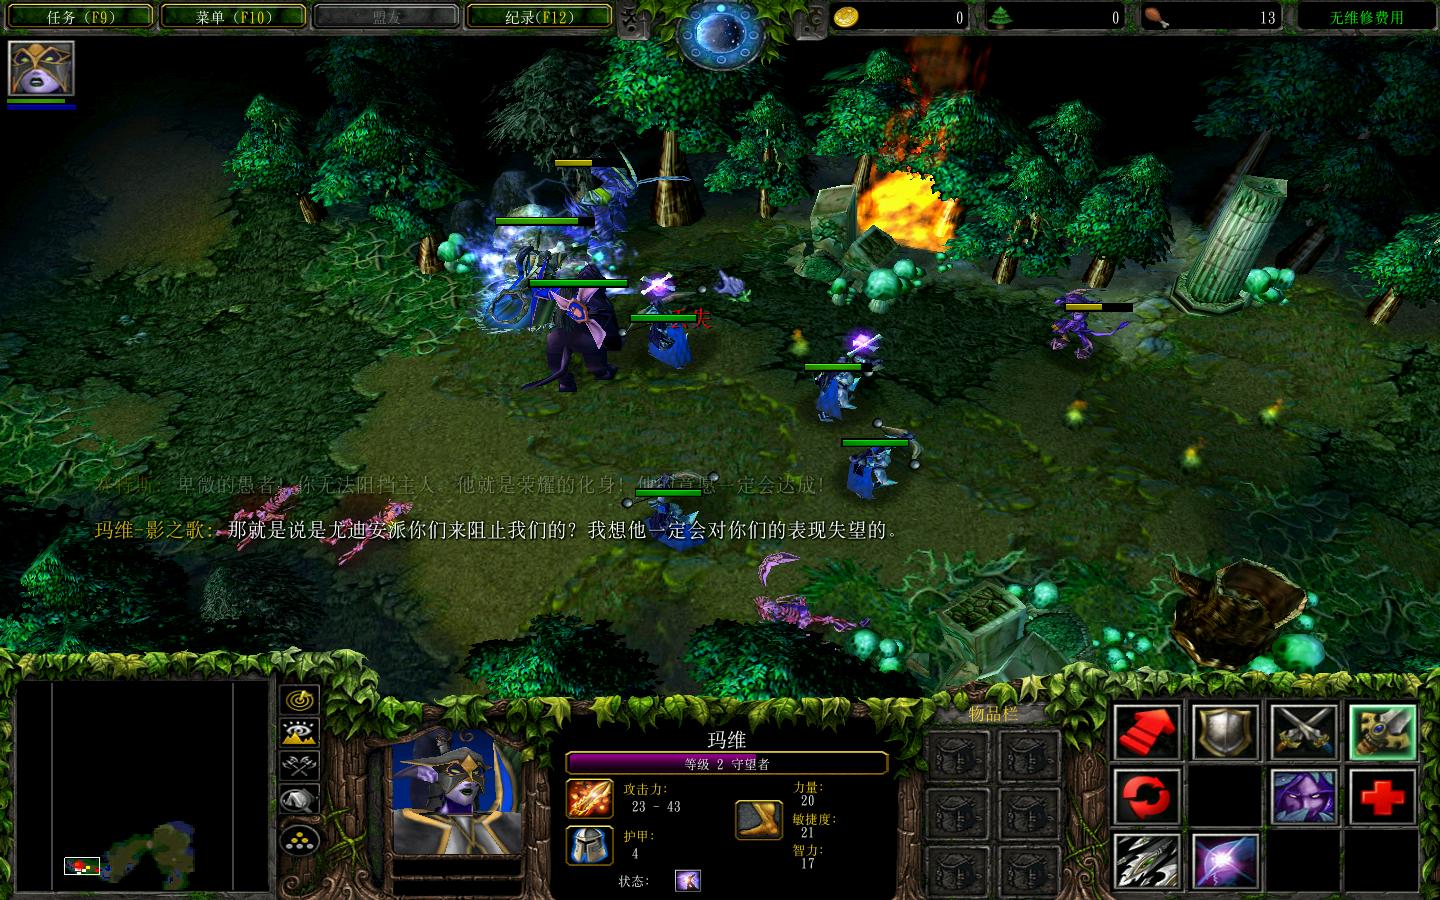 ħ3Warcraft III The Frozen Throne1.24Ӱ v11.0